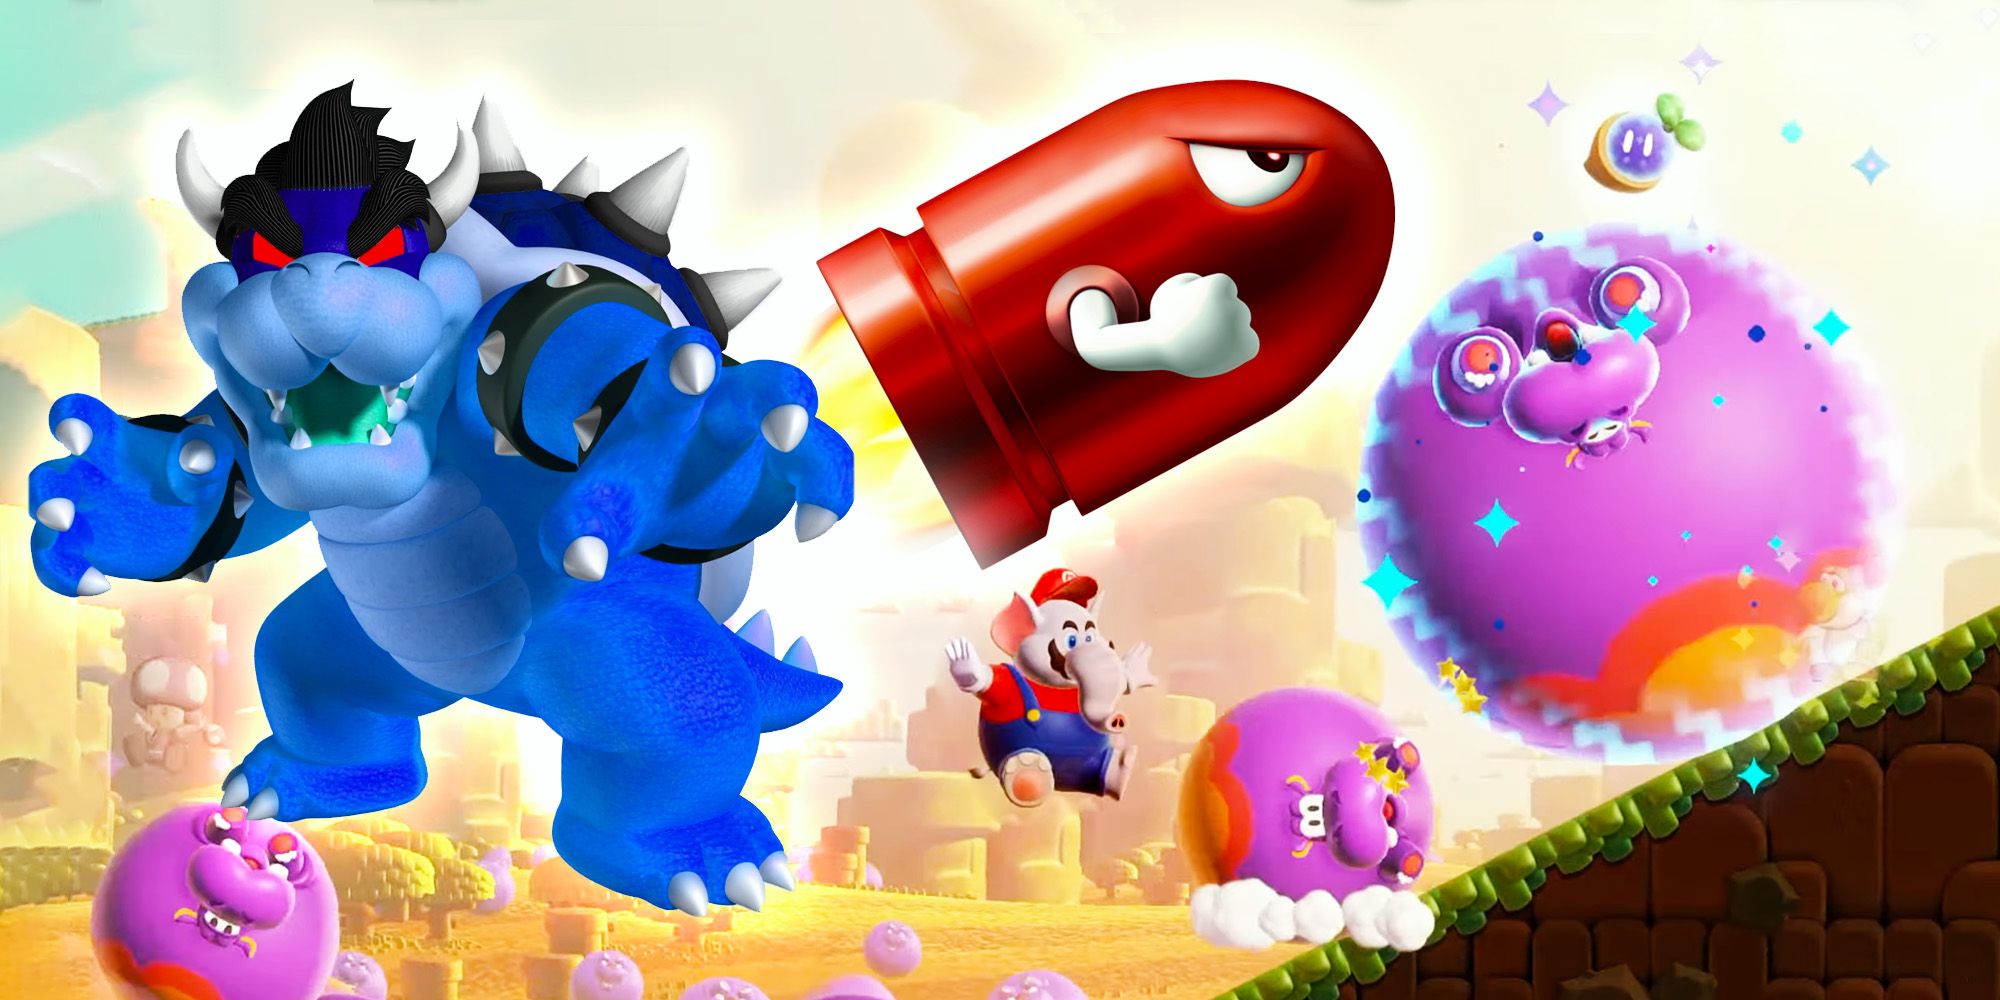 A collage of enemies surrounding Elephant Mario in Super Mario Bros. Wonder, including a bright blue Bowser, a red Bullet Bill, and a three purple bouncy hippo-type creatures.